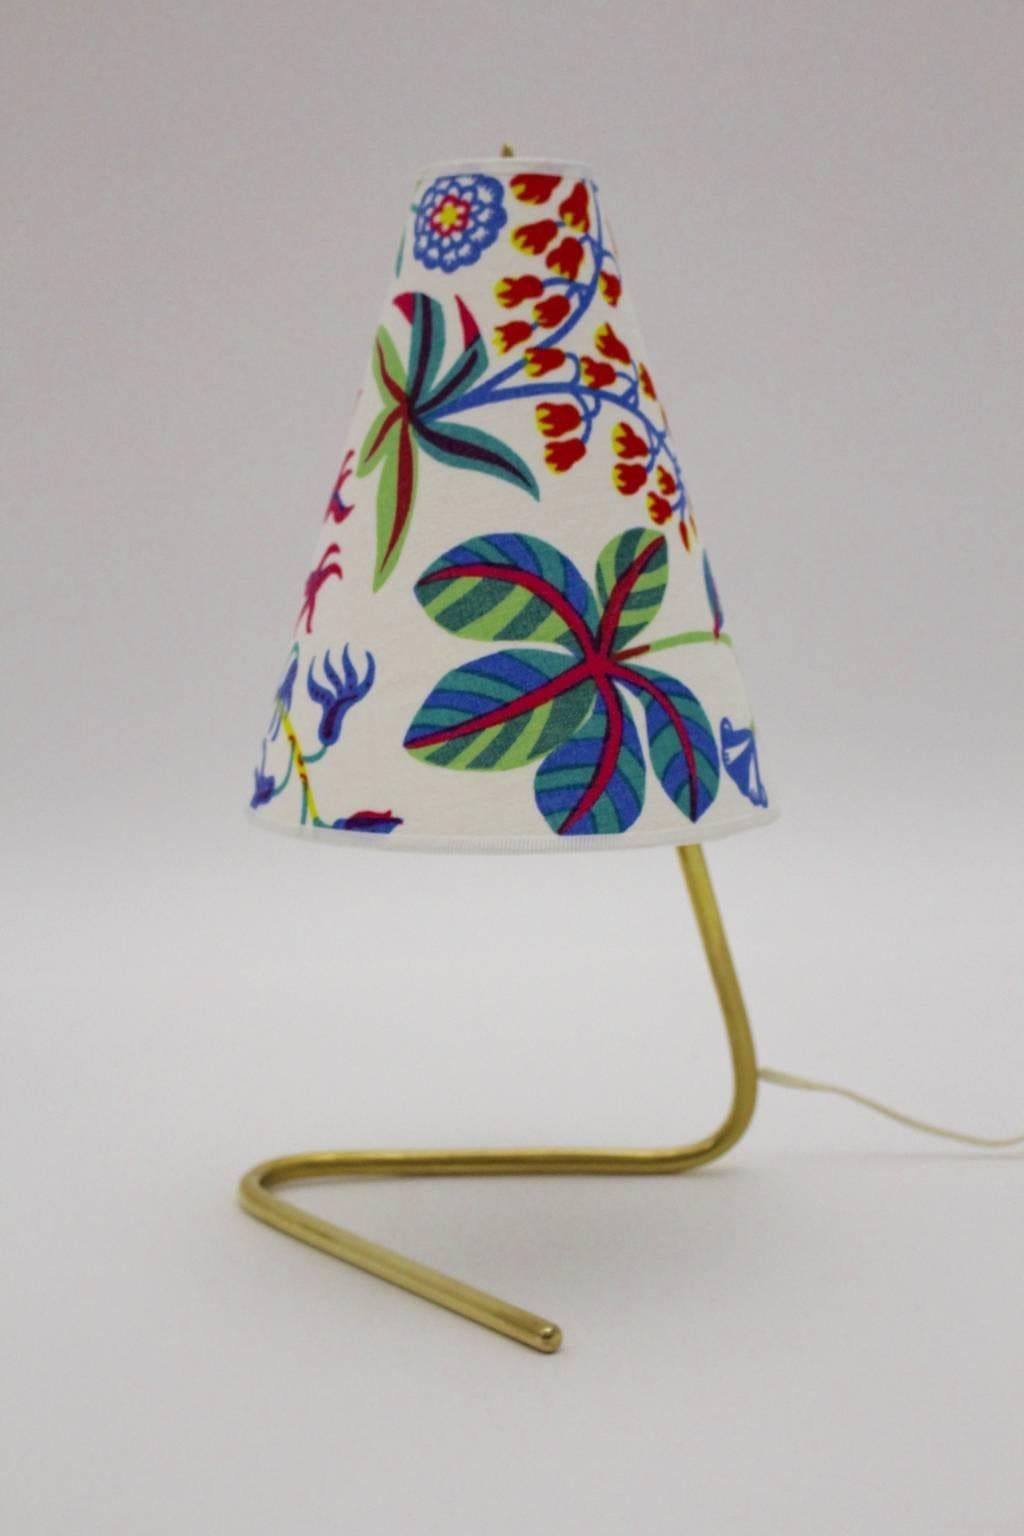 Mid century modern vintage brass table lamp by Rupert Nikoll, Vienna, Austria, 1950s, which tells great Austrian design spirit from the 1950s.
Also the renewed lamp shade is covered with high quality Josef Frank design textile fabric by Svenskt